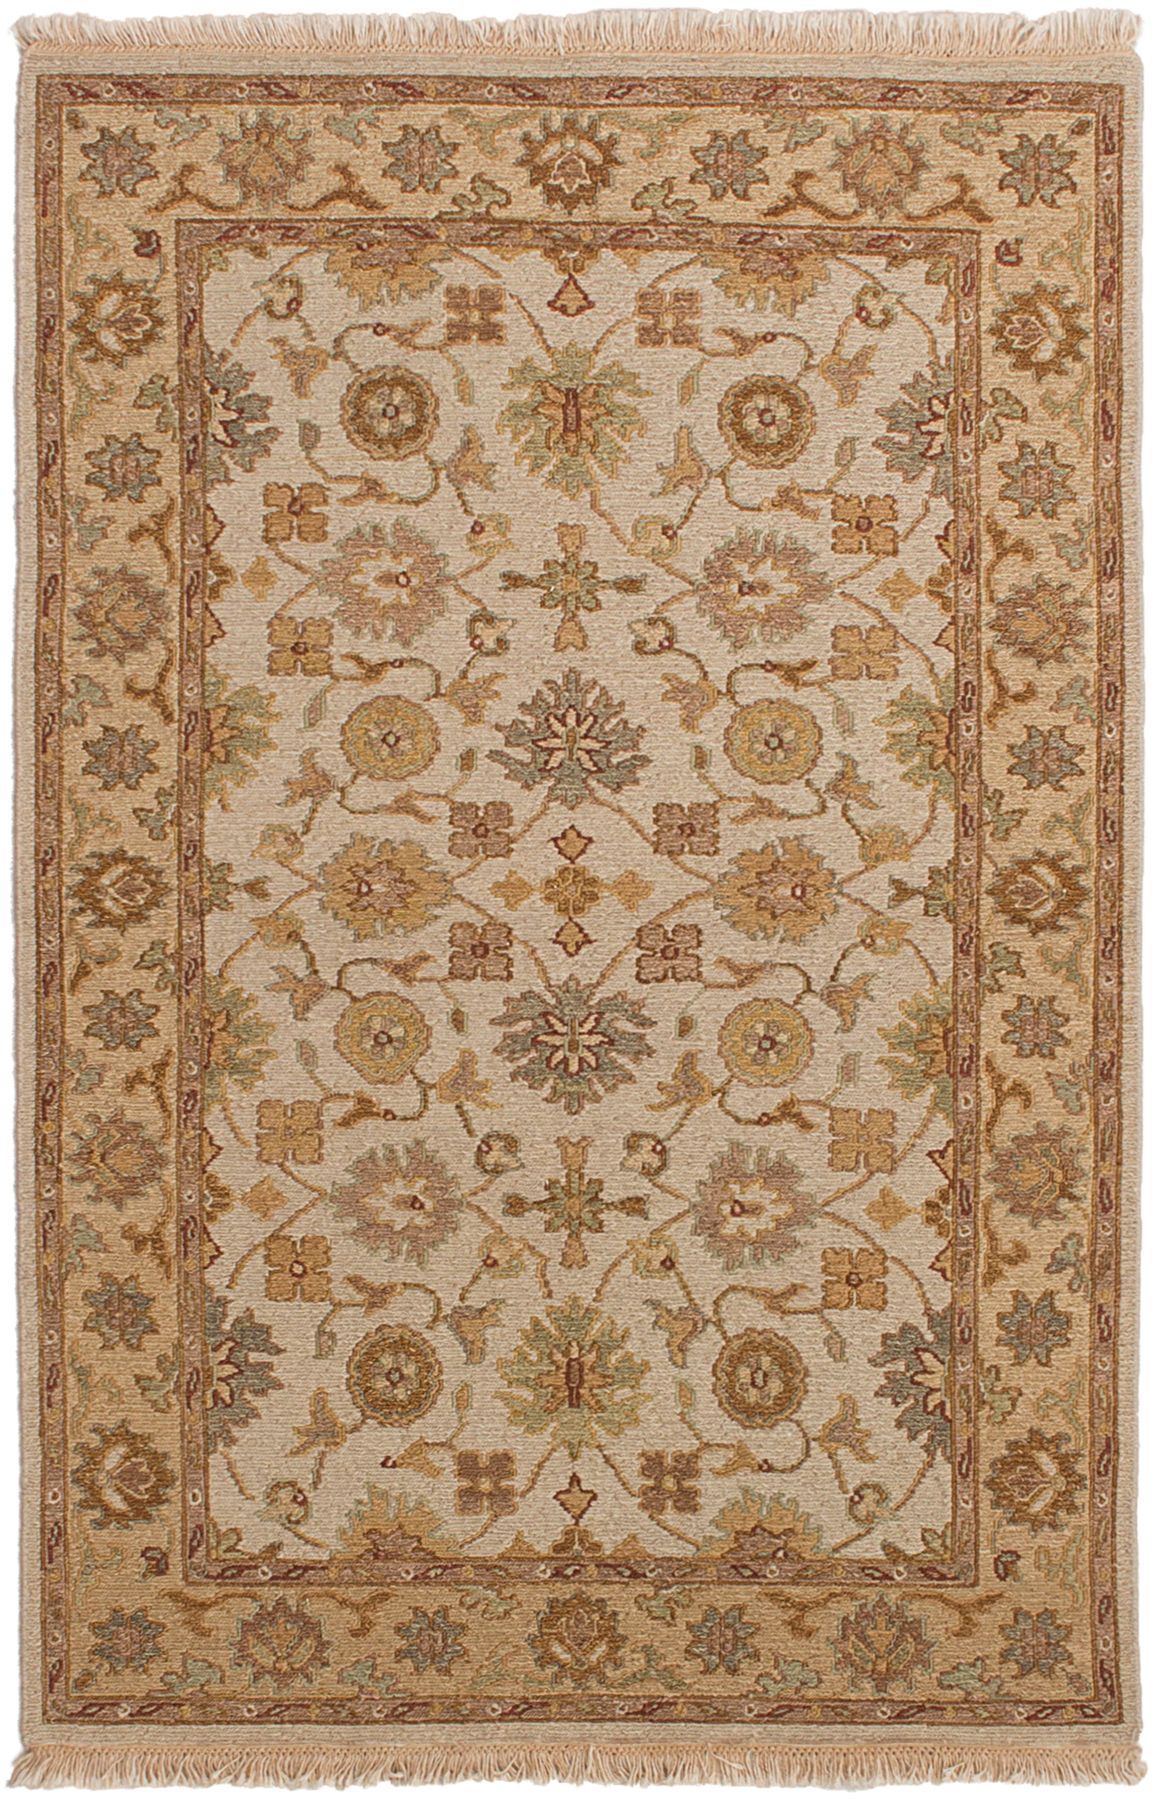 Hand woven Lahor Finest Cream, Light Gold Wool Tapestry Kilim 3'5" x 5'6" Size: 3'5" x 5'6"  